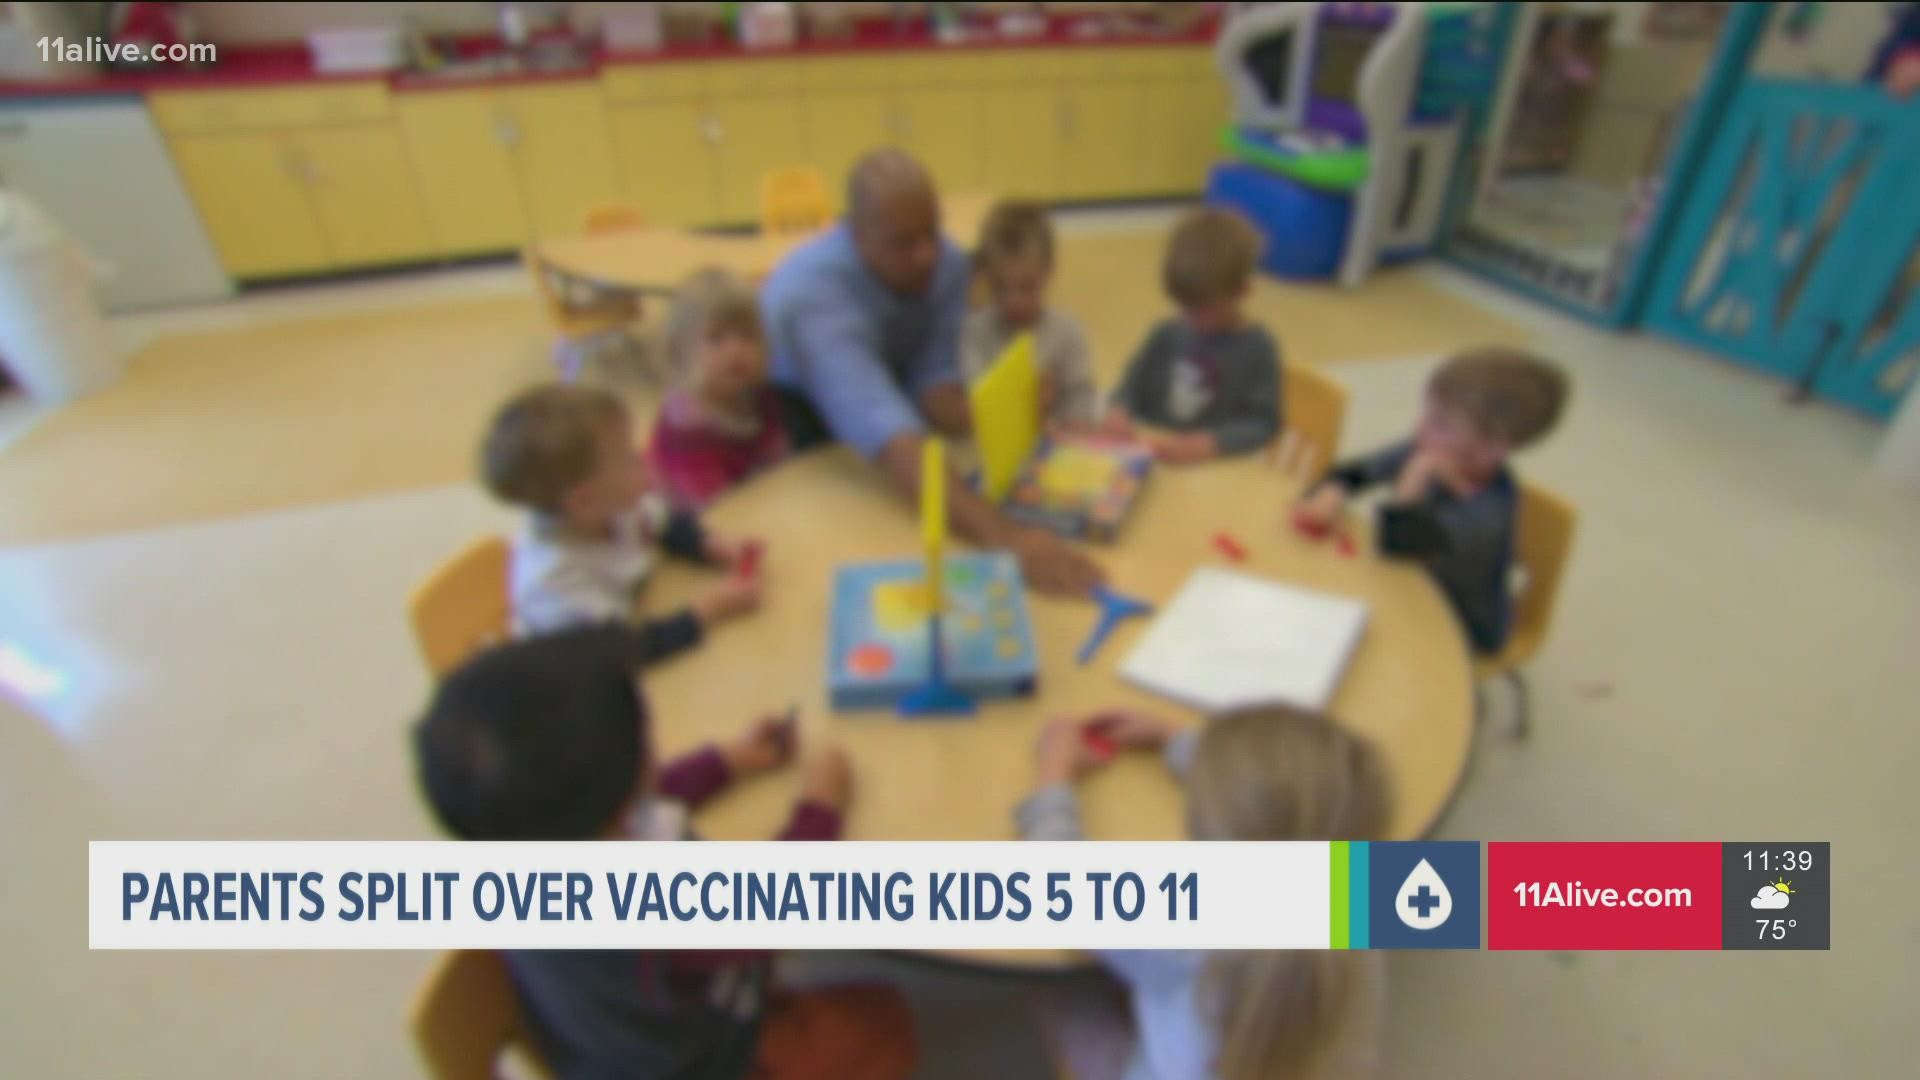 42% said they would not vaccinate their kids.